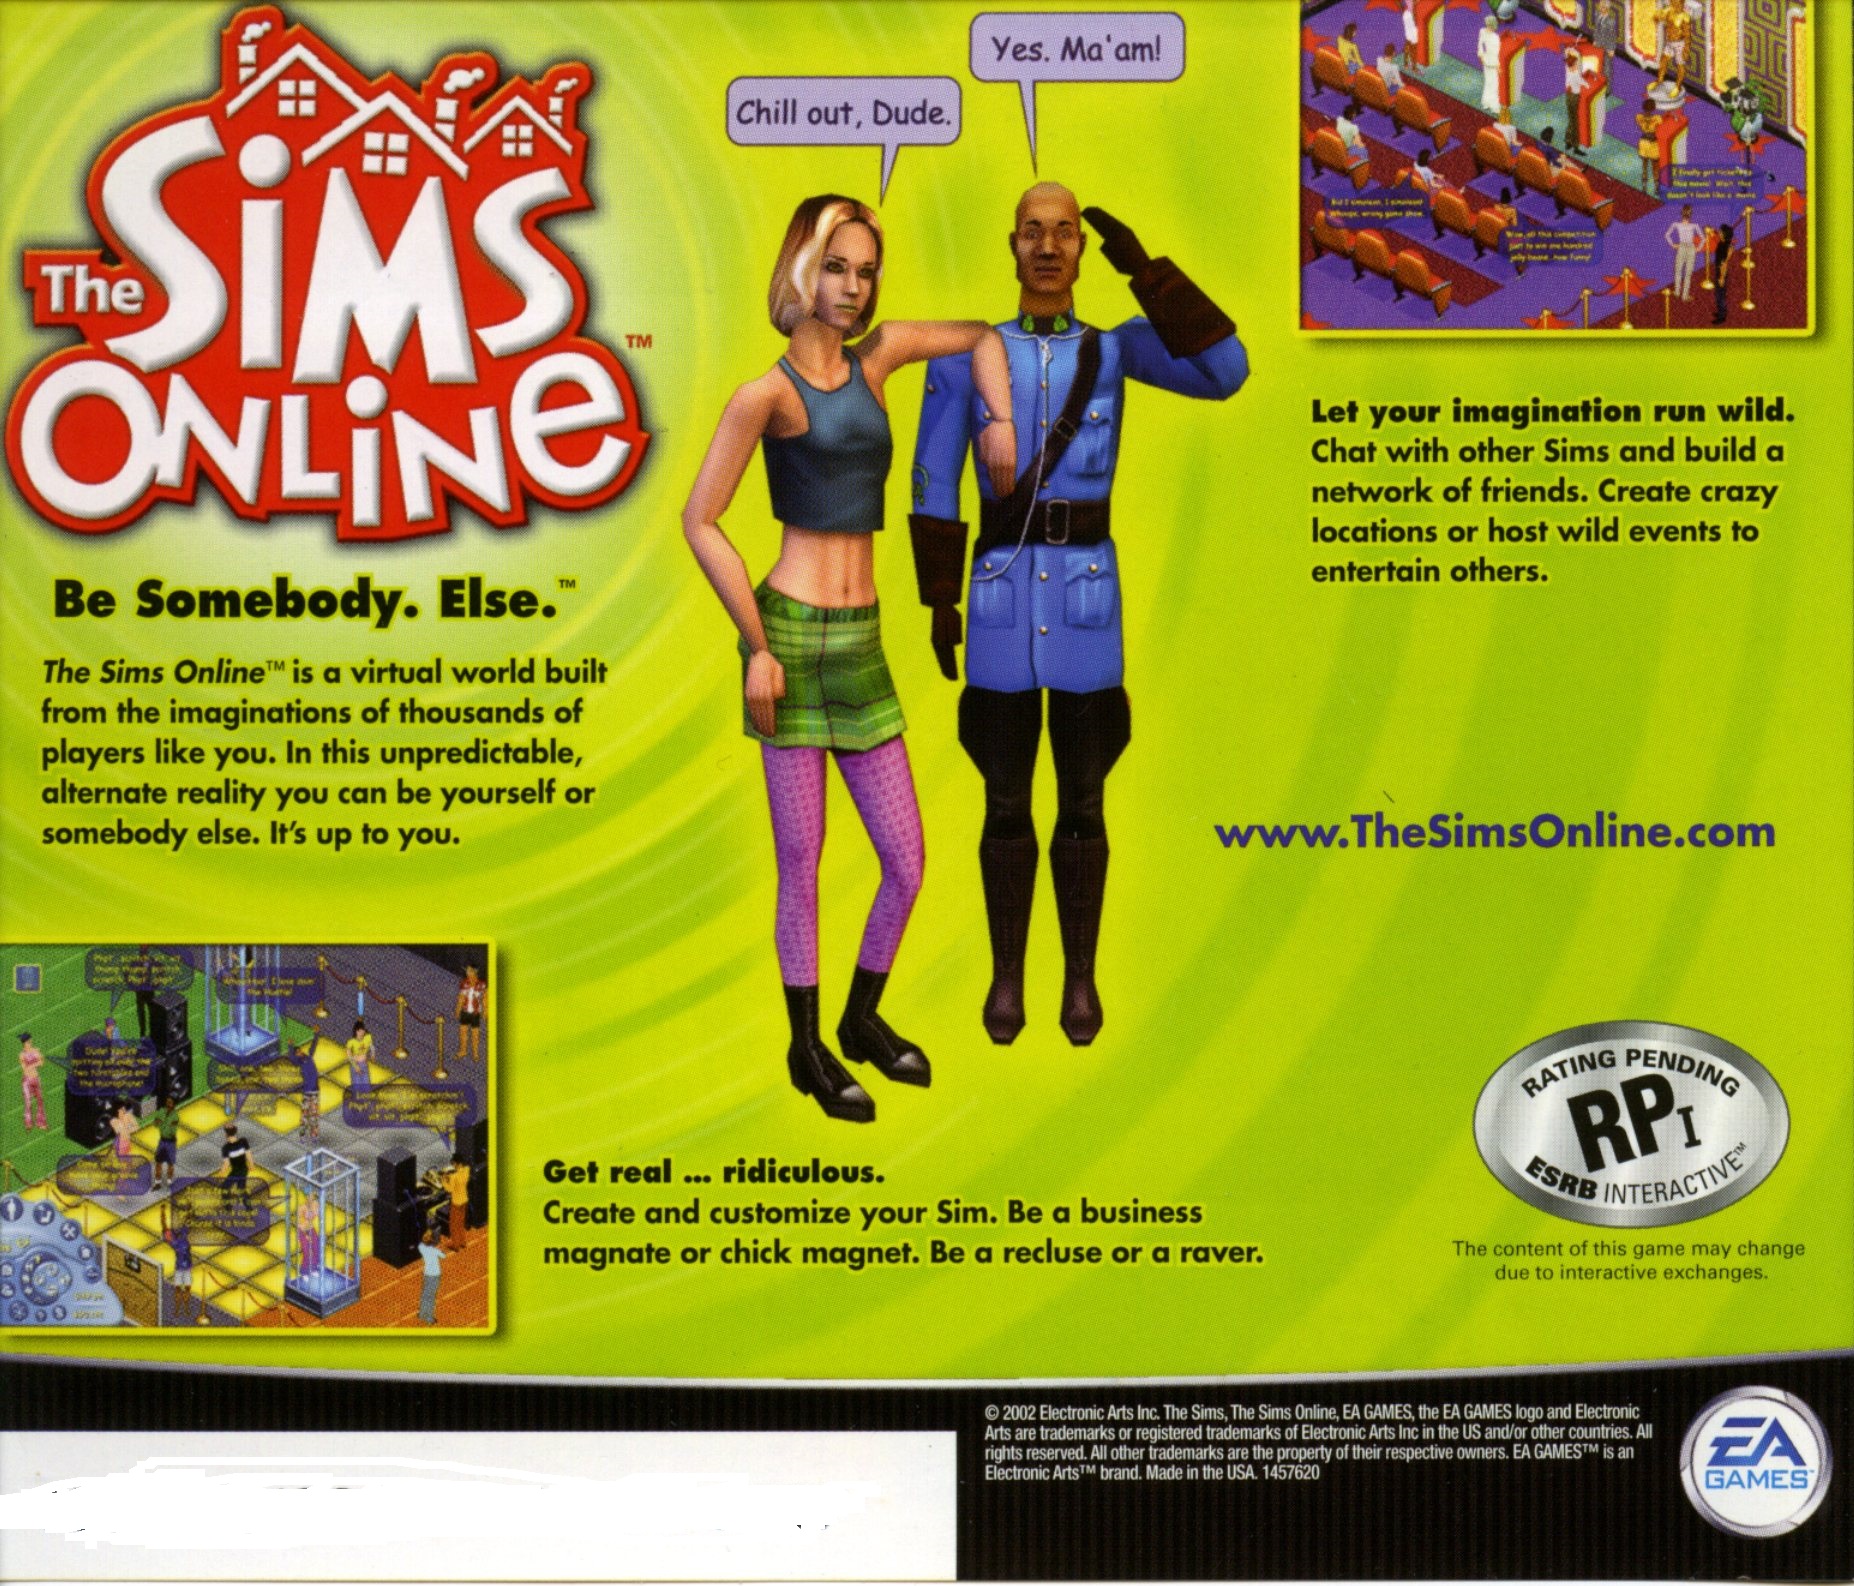 The Sims Online - Wikipedia